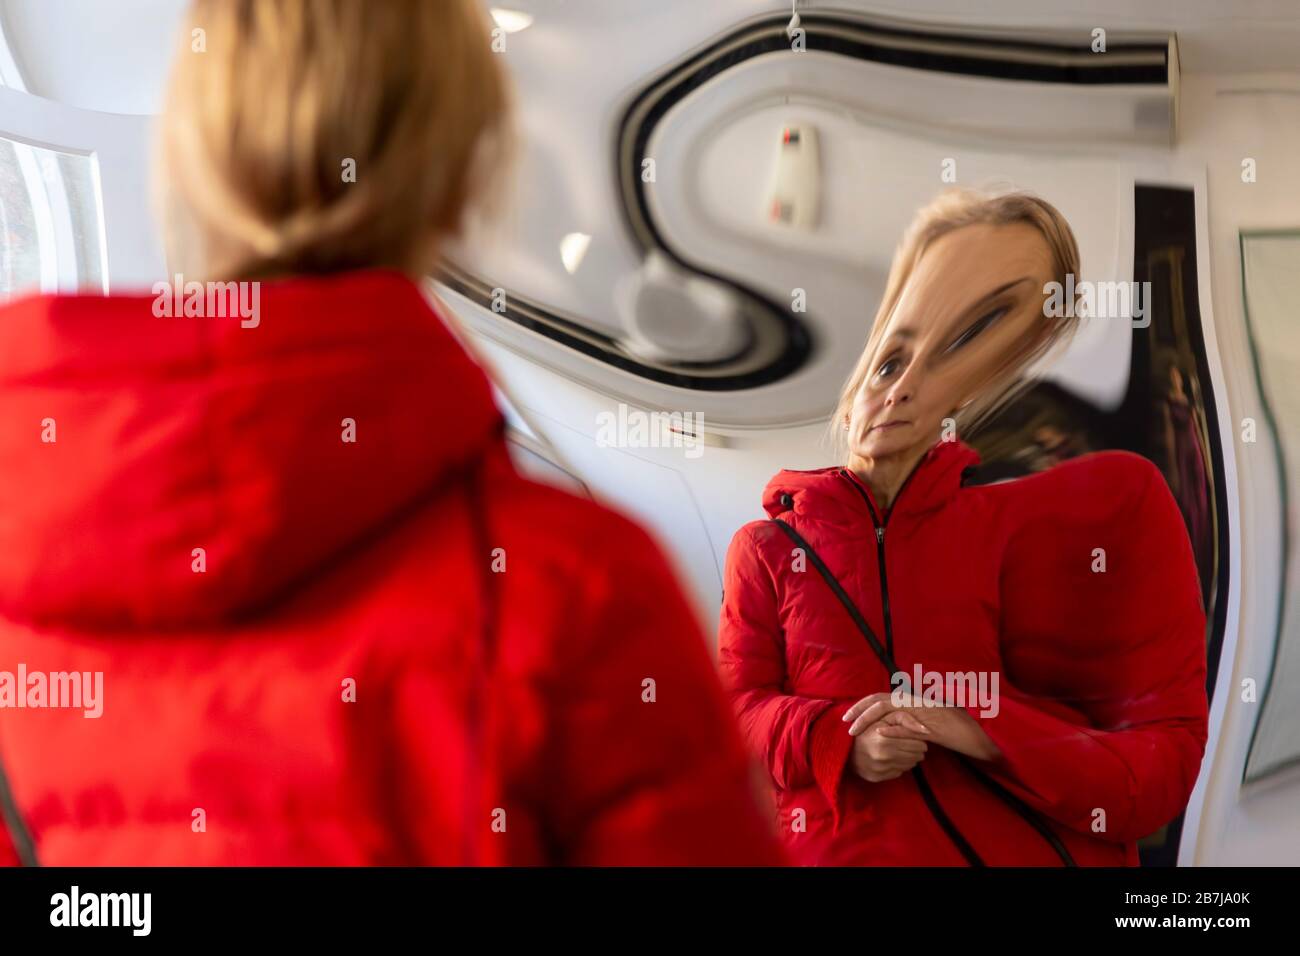 woman distorted in a mirror Stock Photo